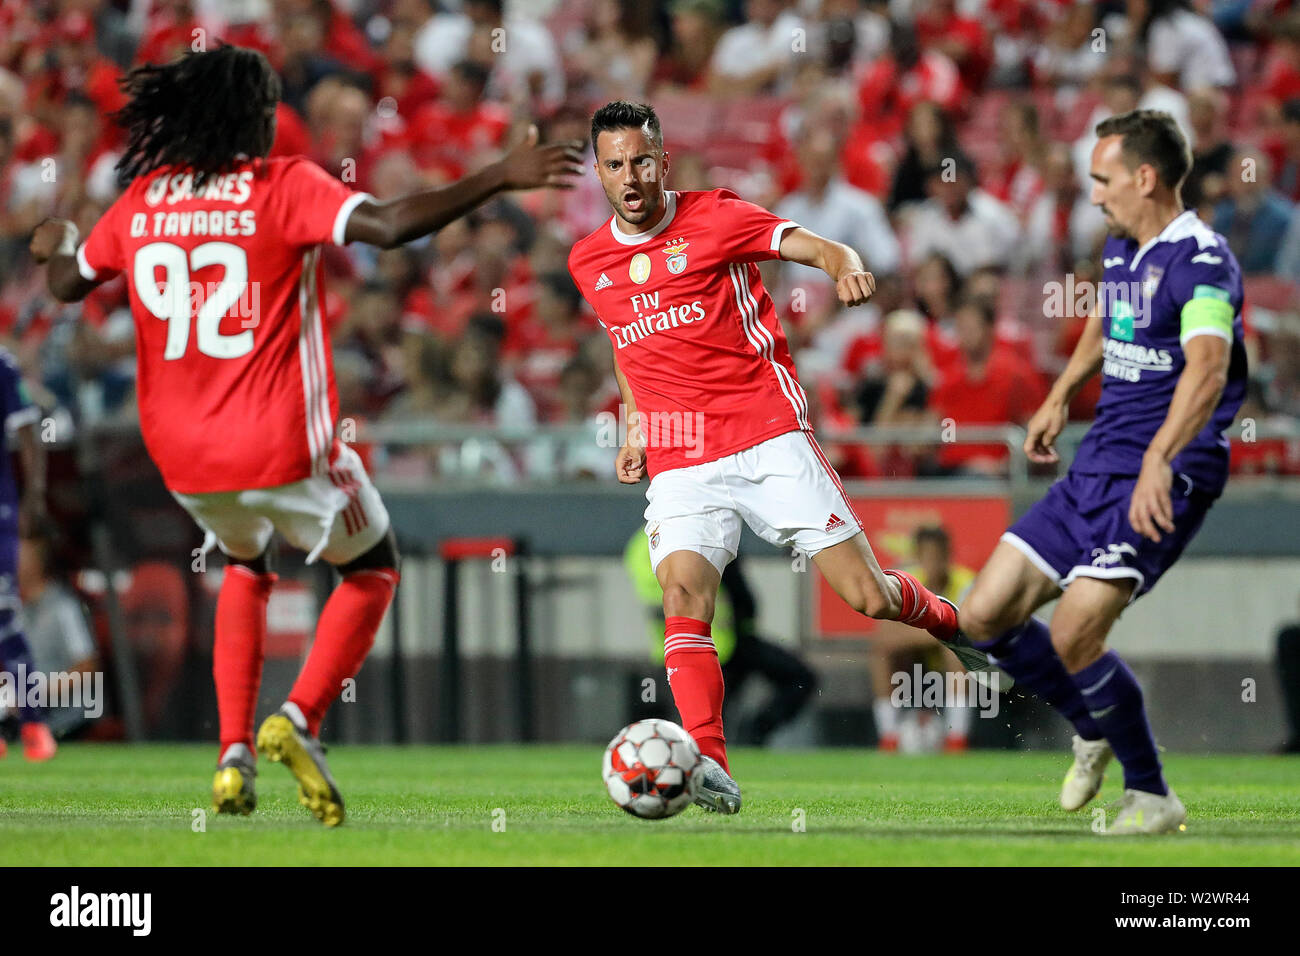 Lisbon, Portugal. 10th July, 2019. Andreas Samaris of SL Benfica in action during the Pre-Season football match 2019/2020 between SL Benfica vs Royal Sporting Club Anderlecht. (Final score: SL Benfica 1 - 2 Royal Sporting Club Anderlecht) Credit: SOPA Images Limited/Alamy Live News Stock Photo